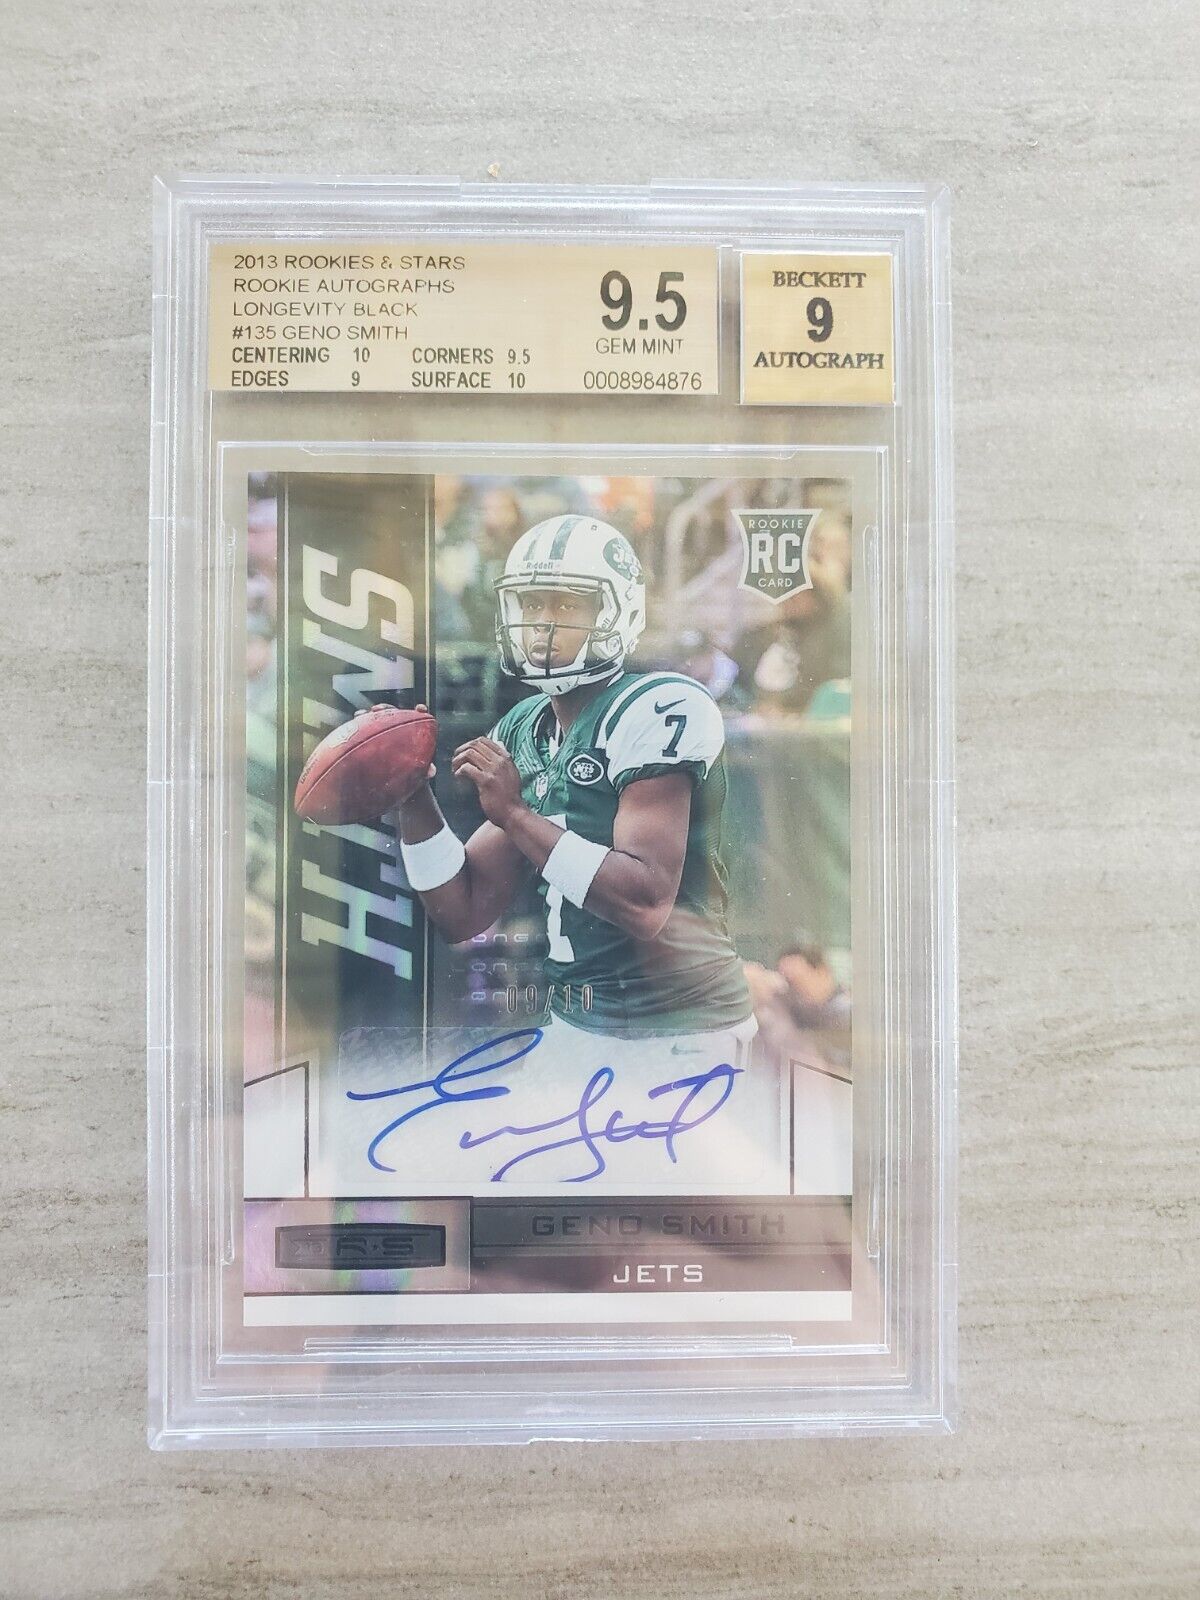 2013 Panini Rookies and Stars Geno Smith Rookie Card Graded 9.5 #135 Autograph 